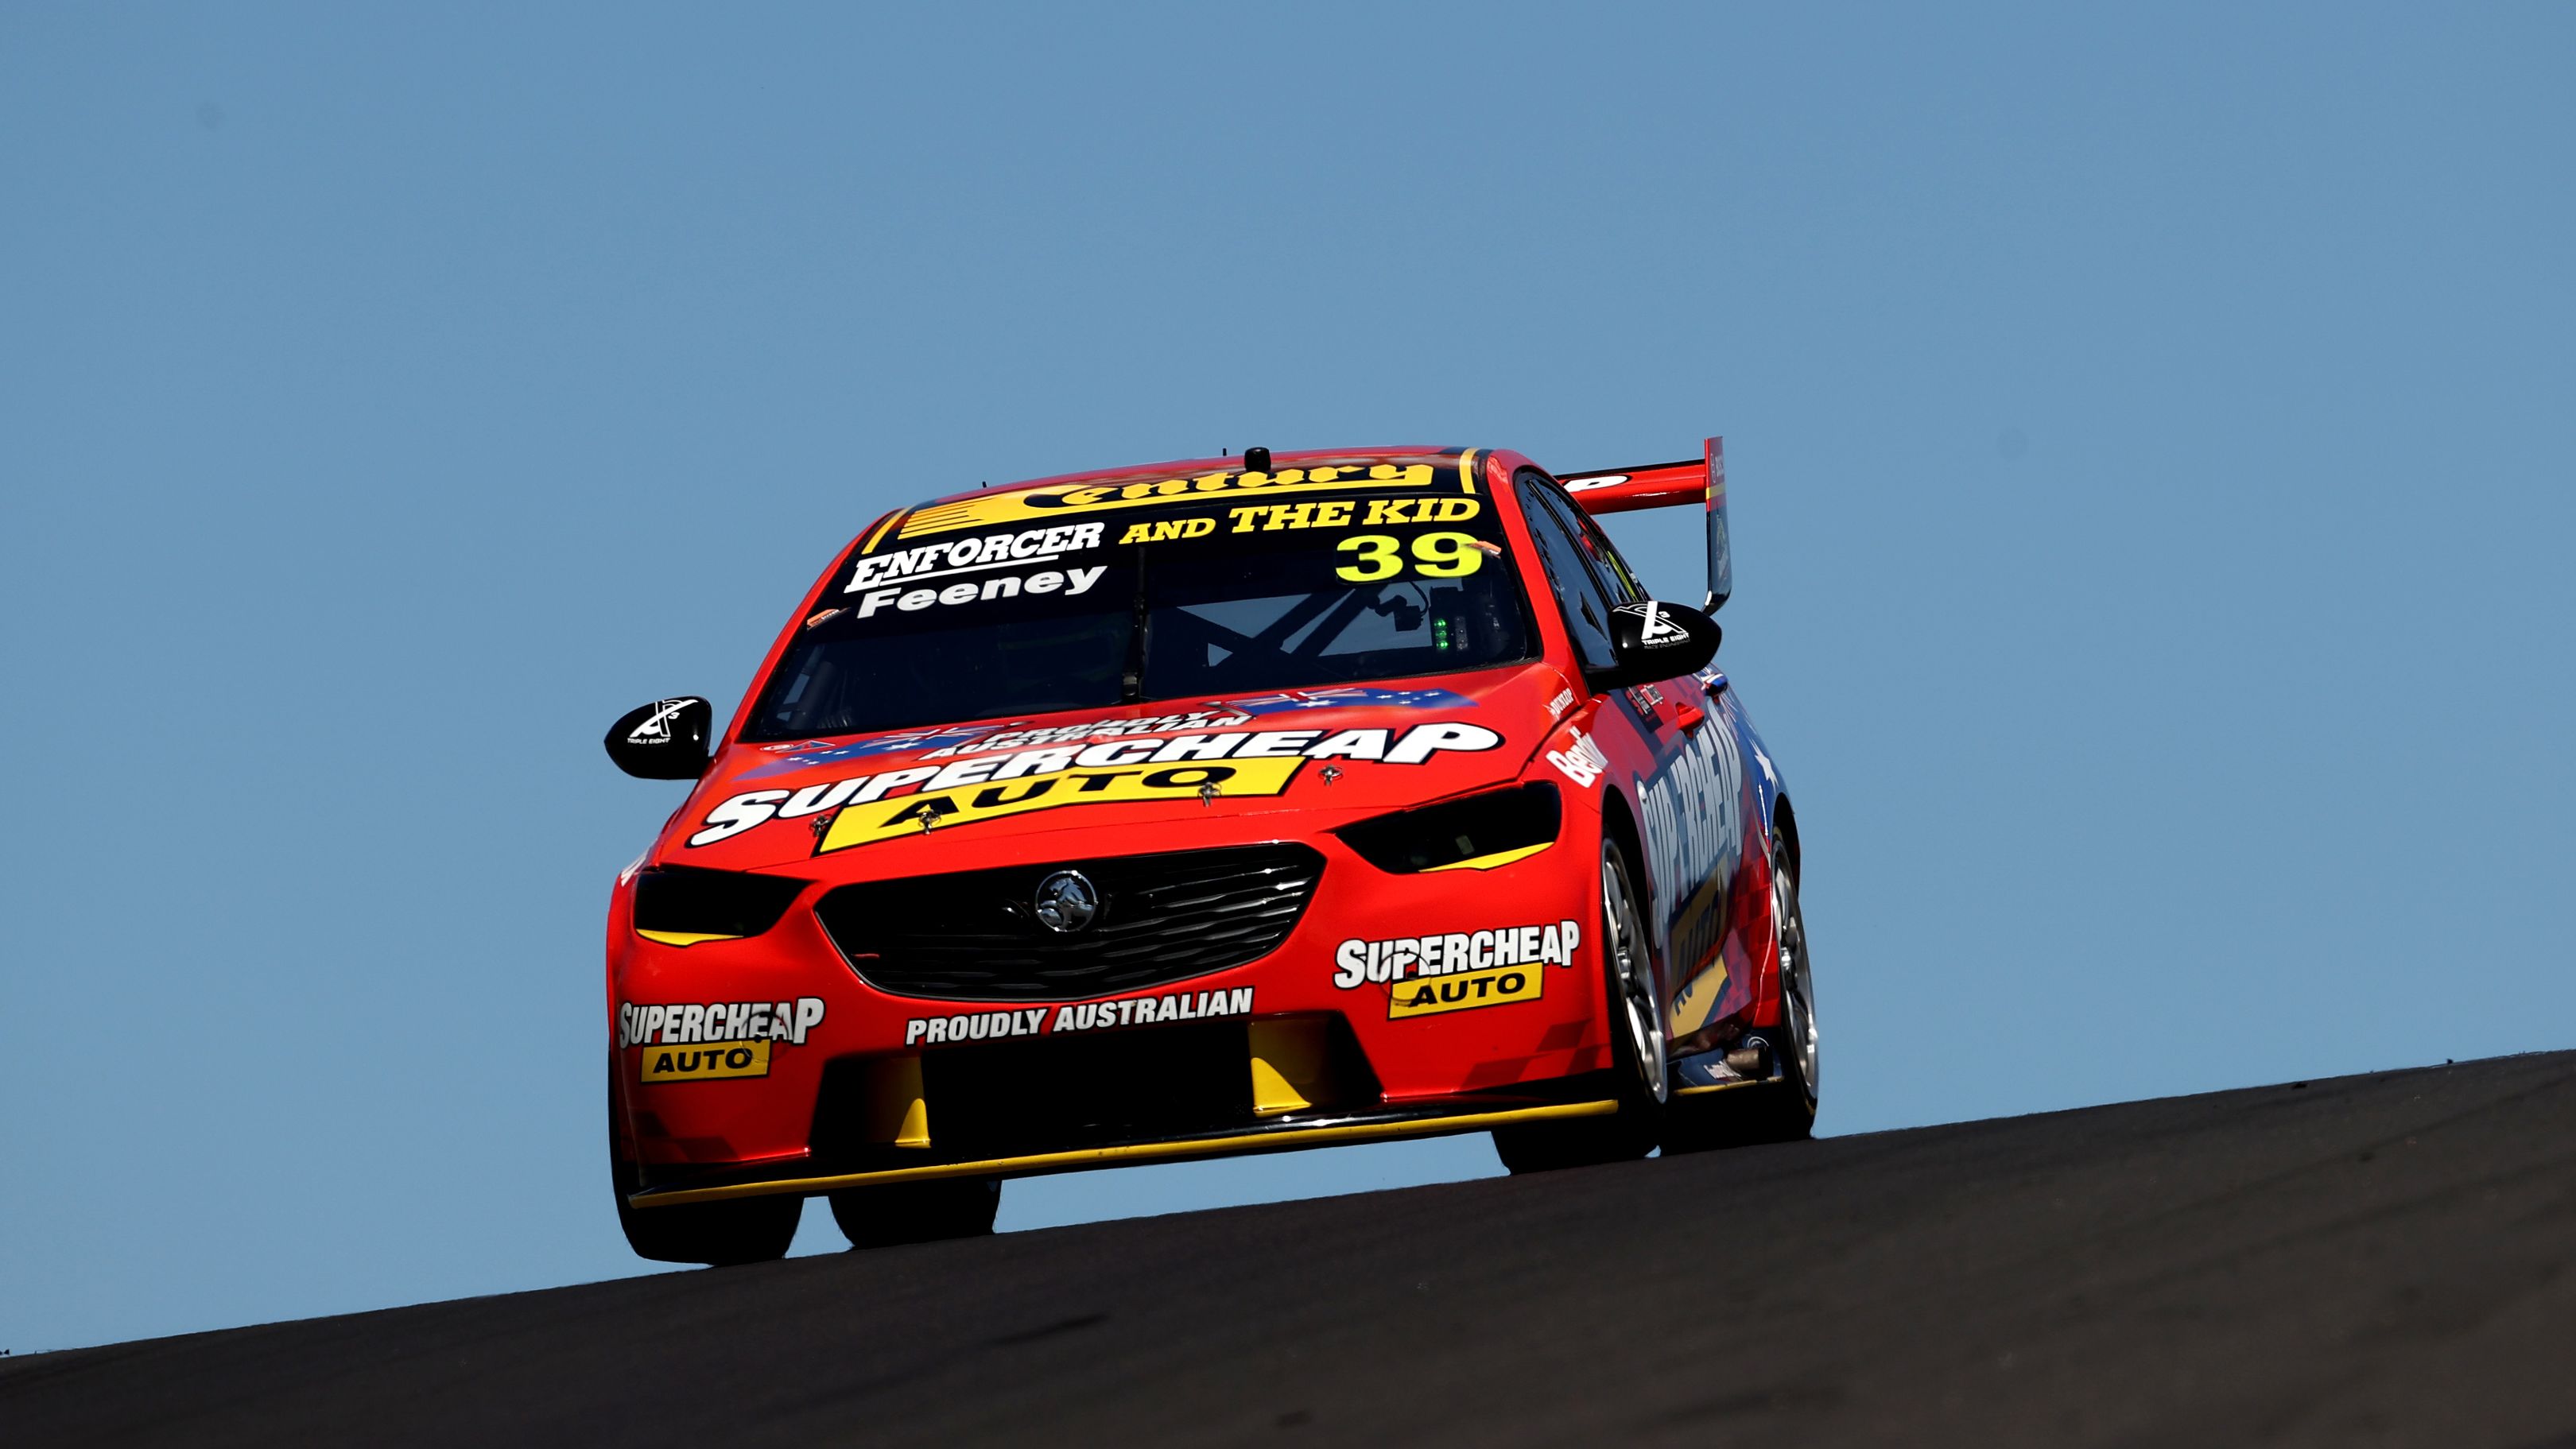 Russell Ingall drives the #39 Supercheap Auto Racing Holden Commodore ZB  in practice during the Bathurst 1000 which is part of the 2021 Supercars Championship, at Mount Panorama, on December 04, 2021 in Bathurst, Australia. (Photo by Brendon Thorne/Getty Images)